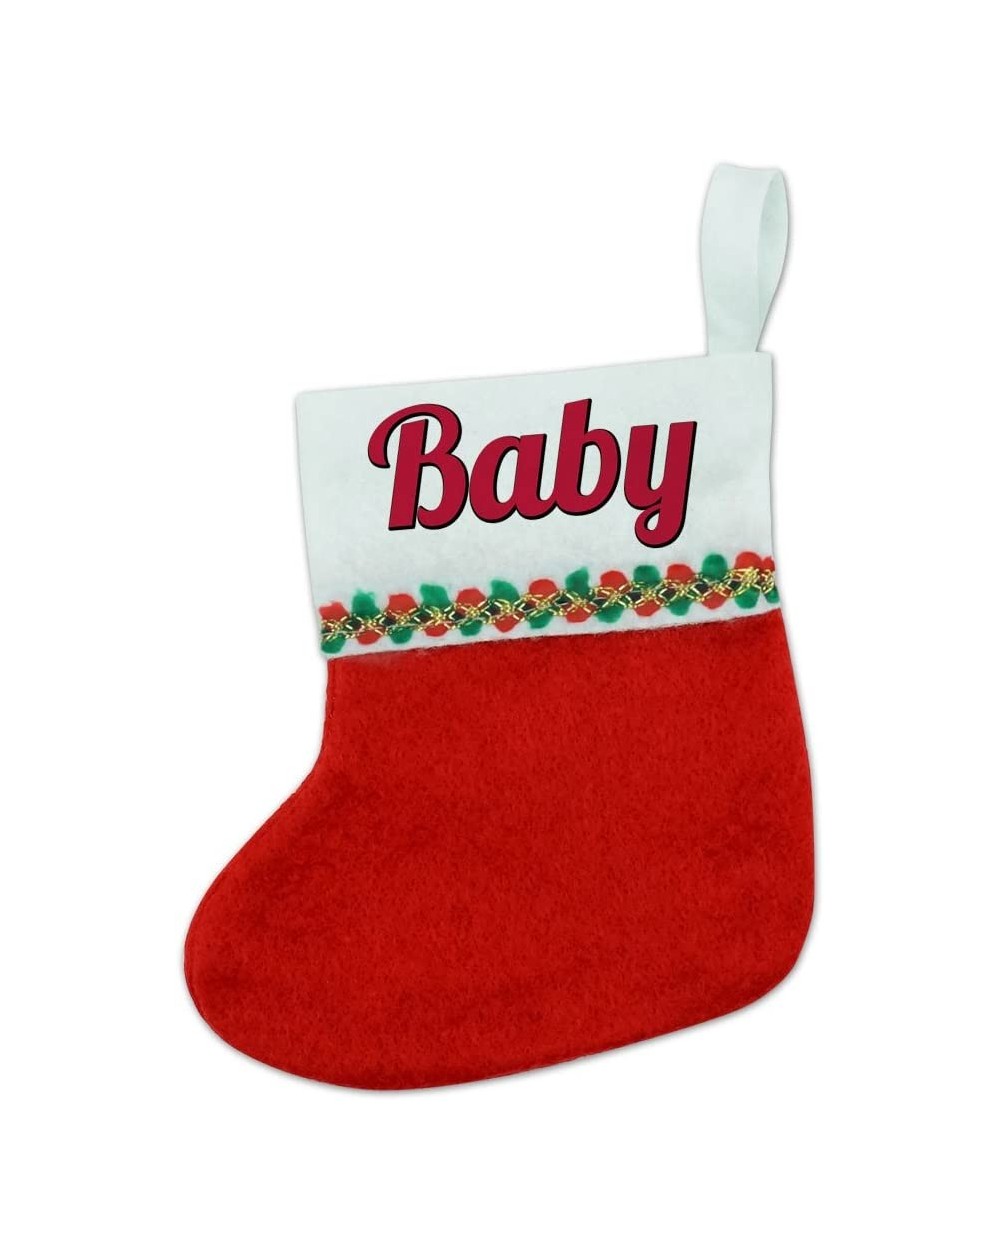 Stockings & Holders Christmas Holiday Red White Felt Mini Small Stocking - Red Text - Family - Baby - Baby - C512N1VXMW3 $9.95